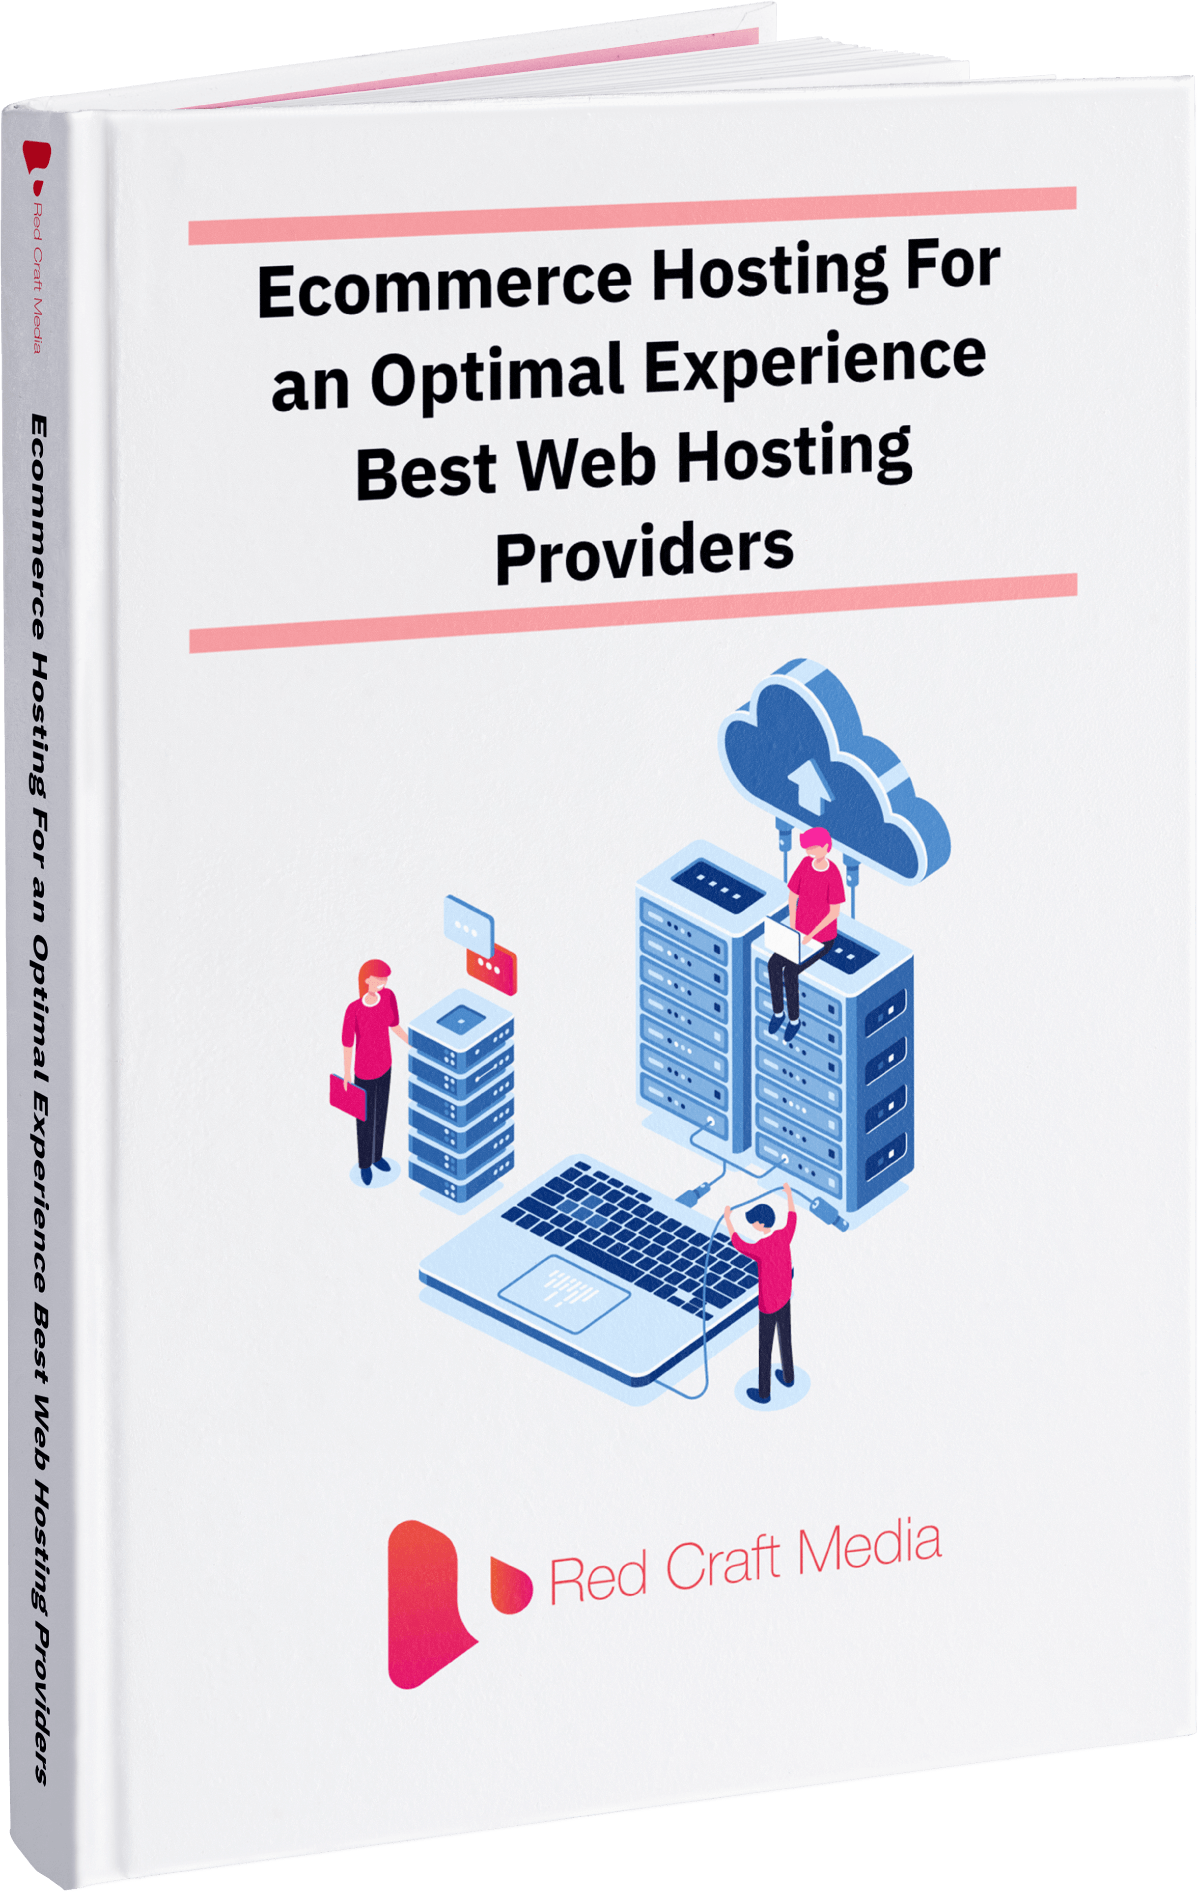 Ecommerce Hosting For an Optimal Experience Best Web Hosting Providers